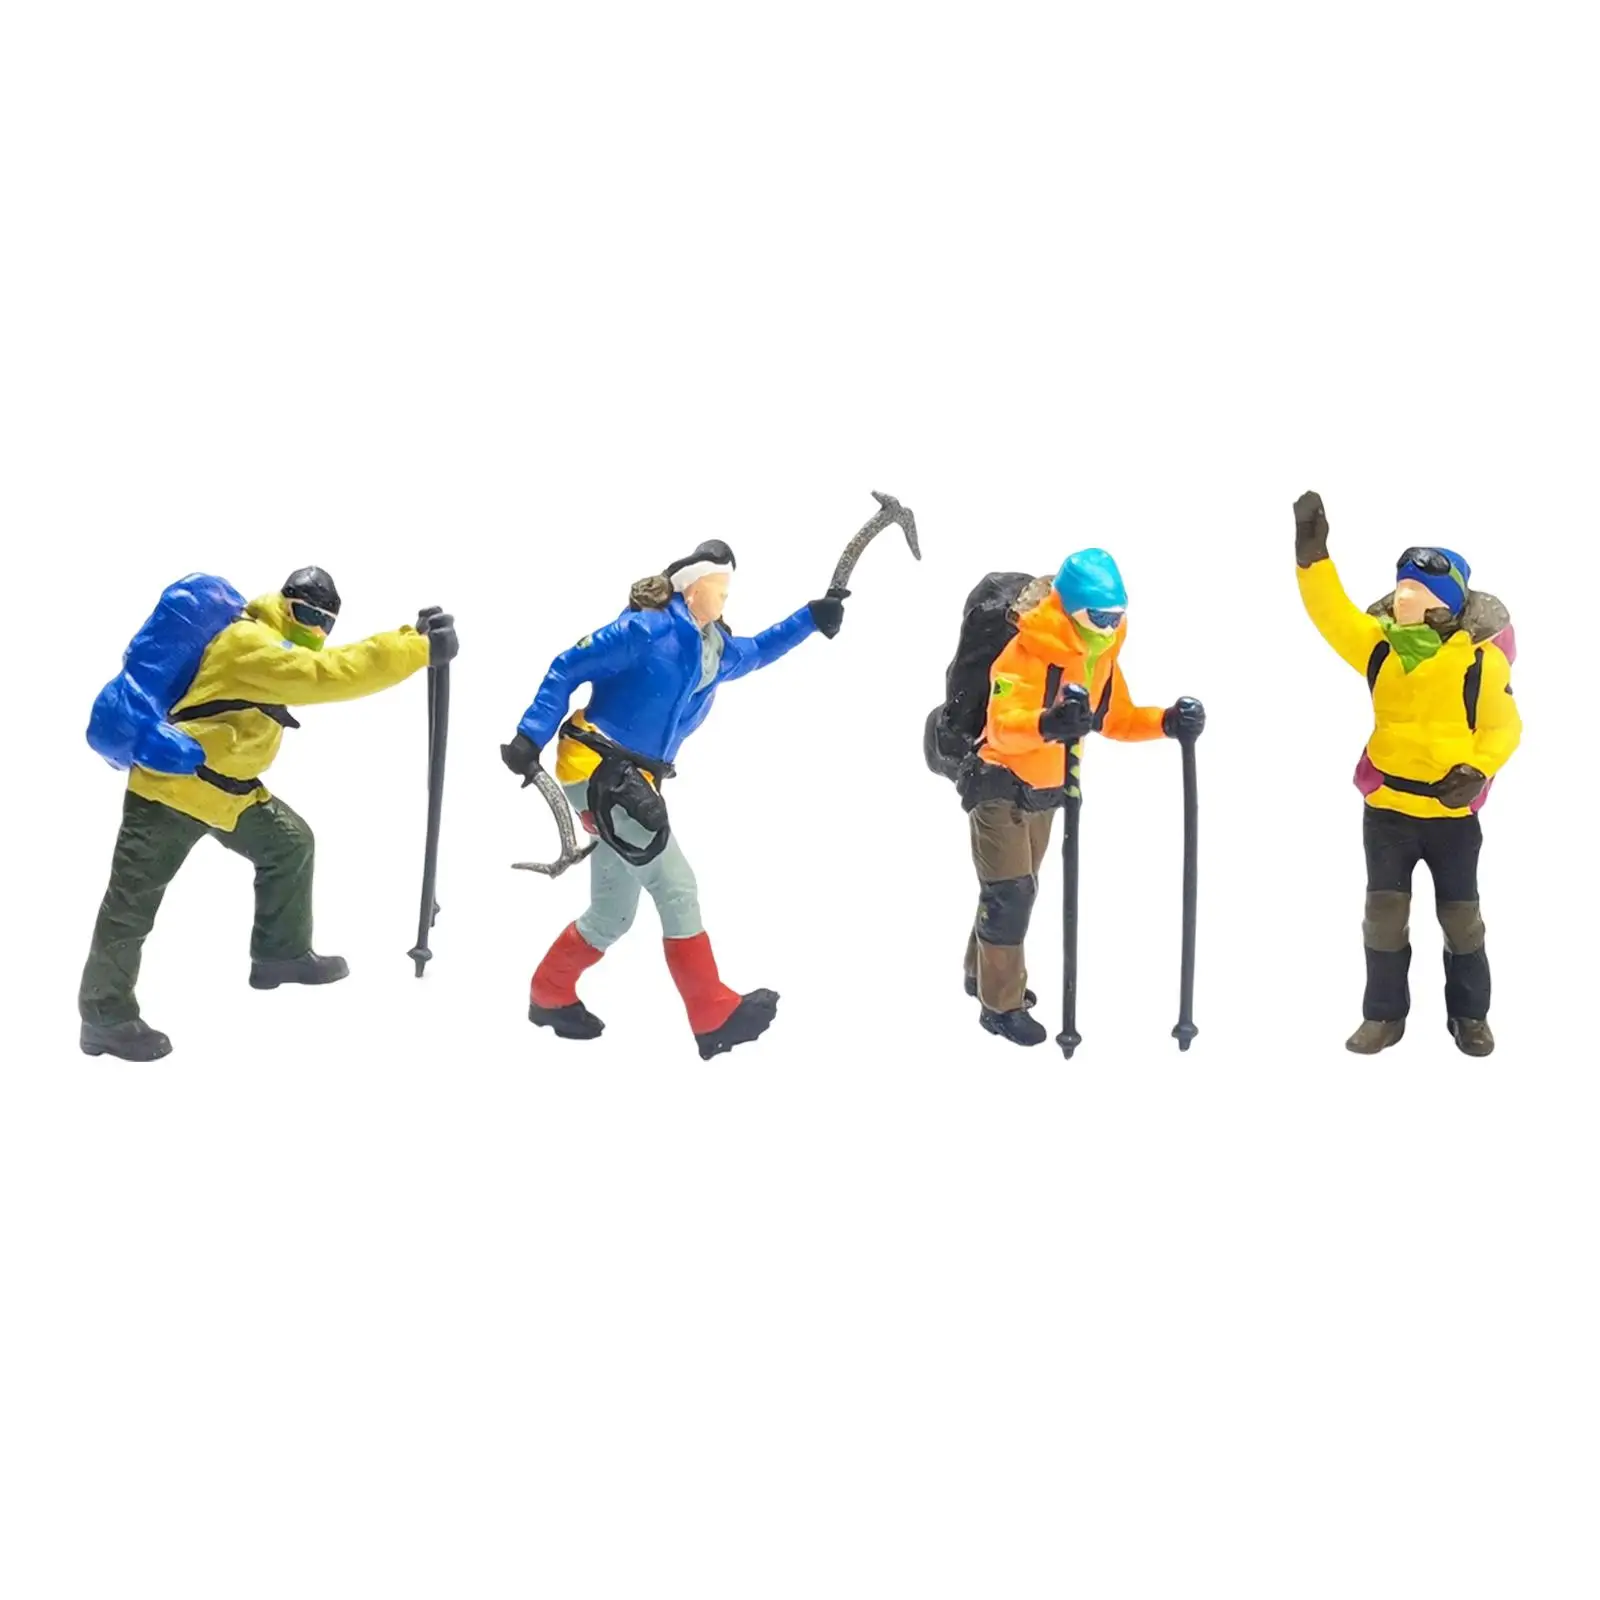 Realistic 1/87 Climbing People Figurines Tiny People Ornament for Layout